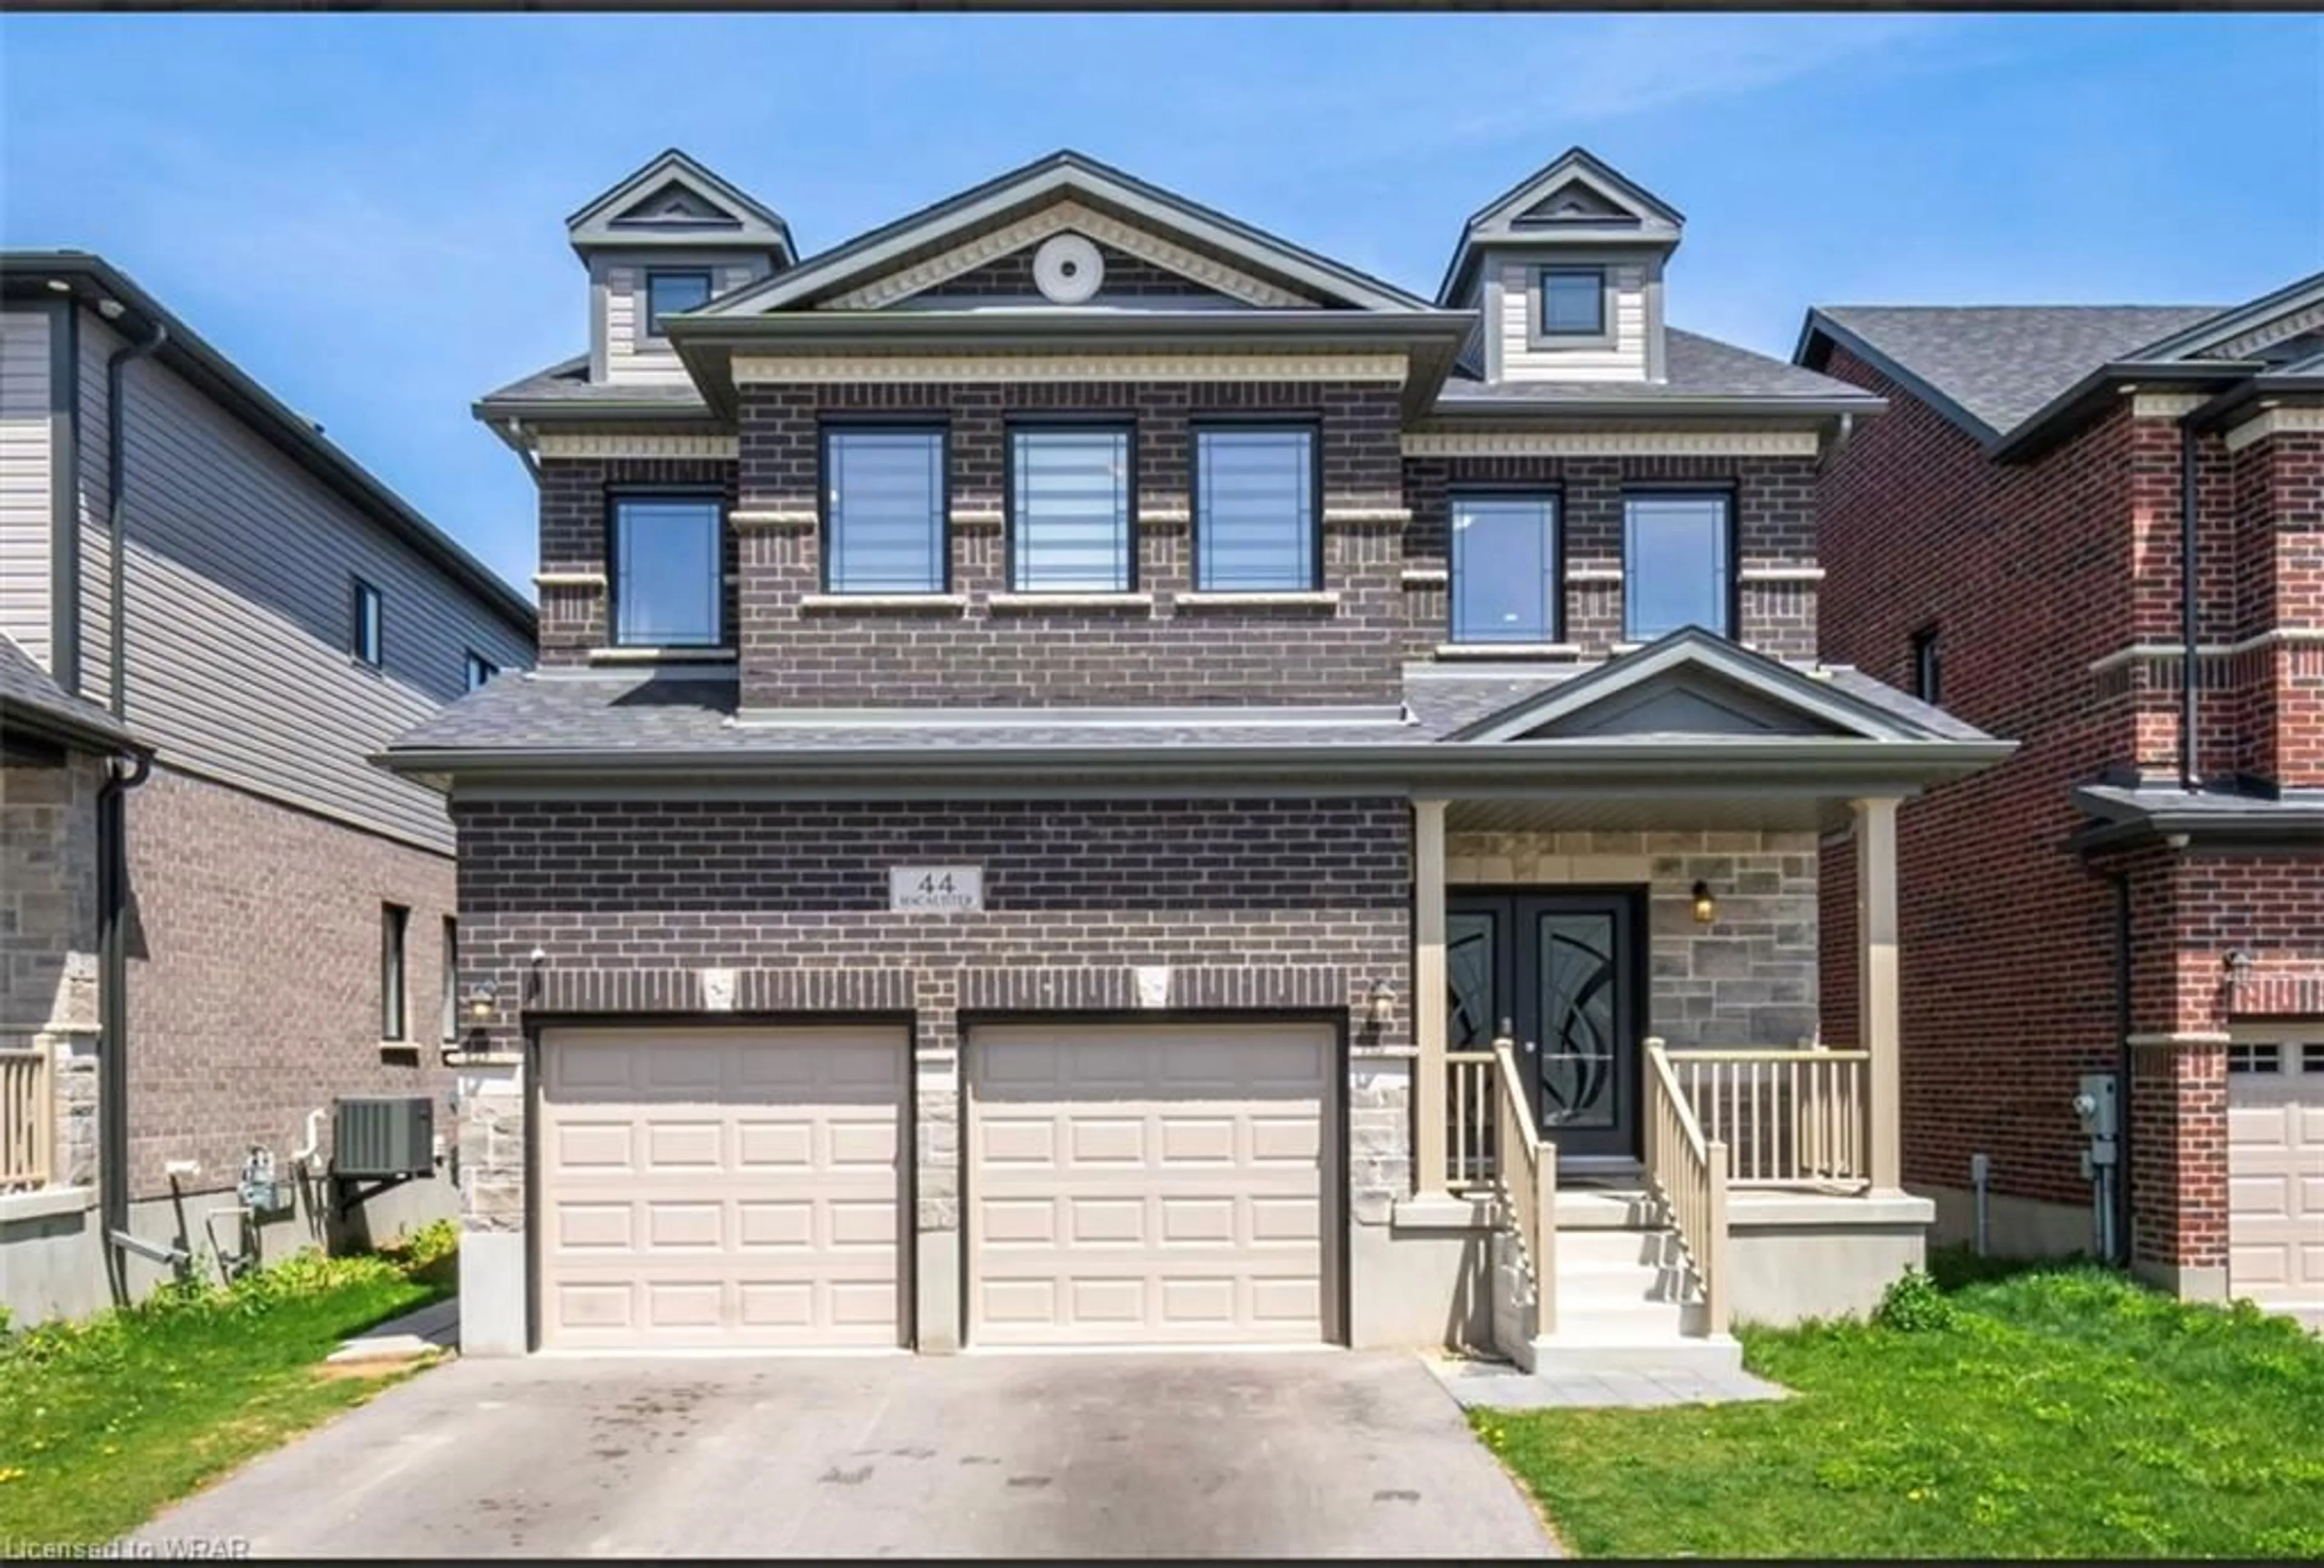 Home with brick exterior material for 44 Macalister Blvd, Guelph Ontario N1G 0G6